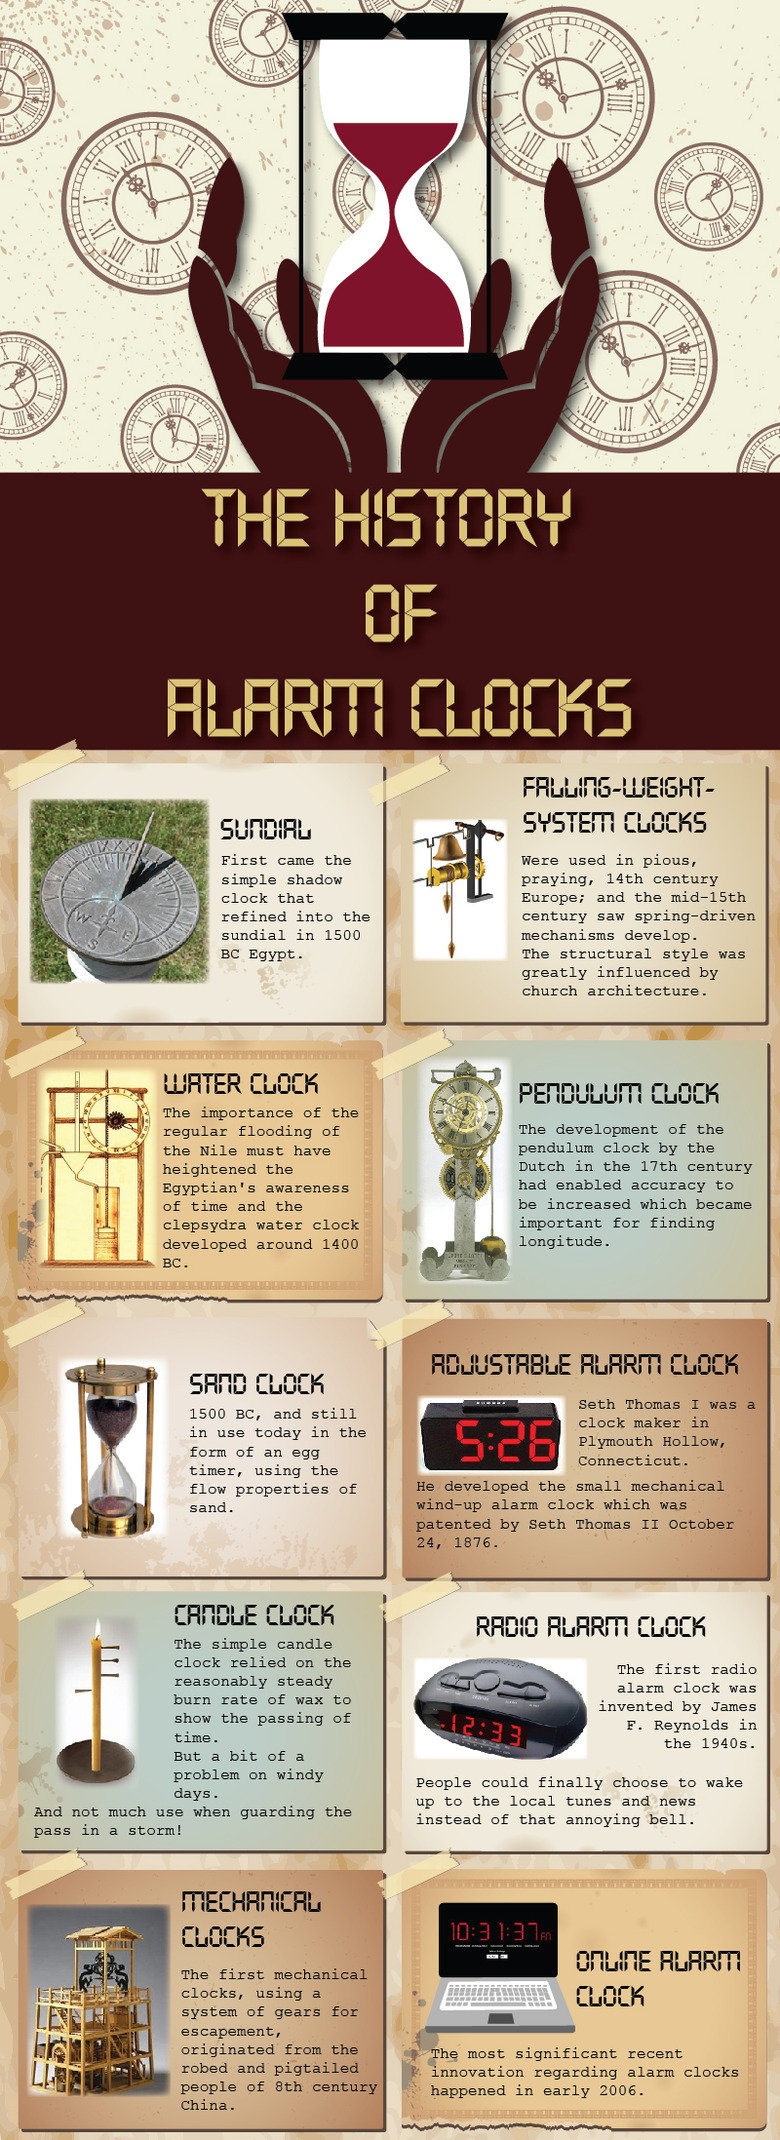 History of Alarm Clocks. Alarm Clocks are the being used from long time ago. The Sundirl was the first alarm clock which were used. It is simple shadow clock th